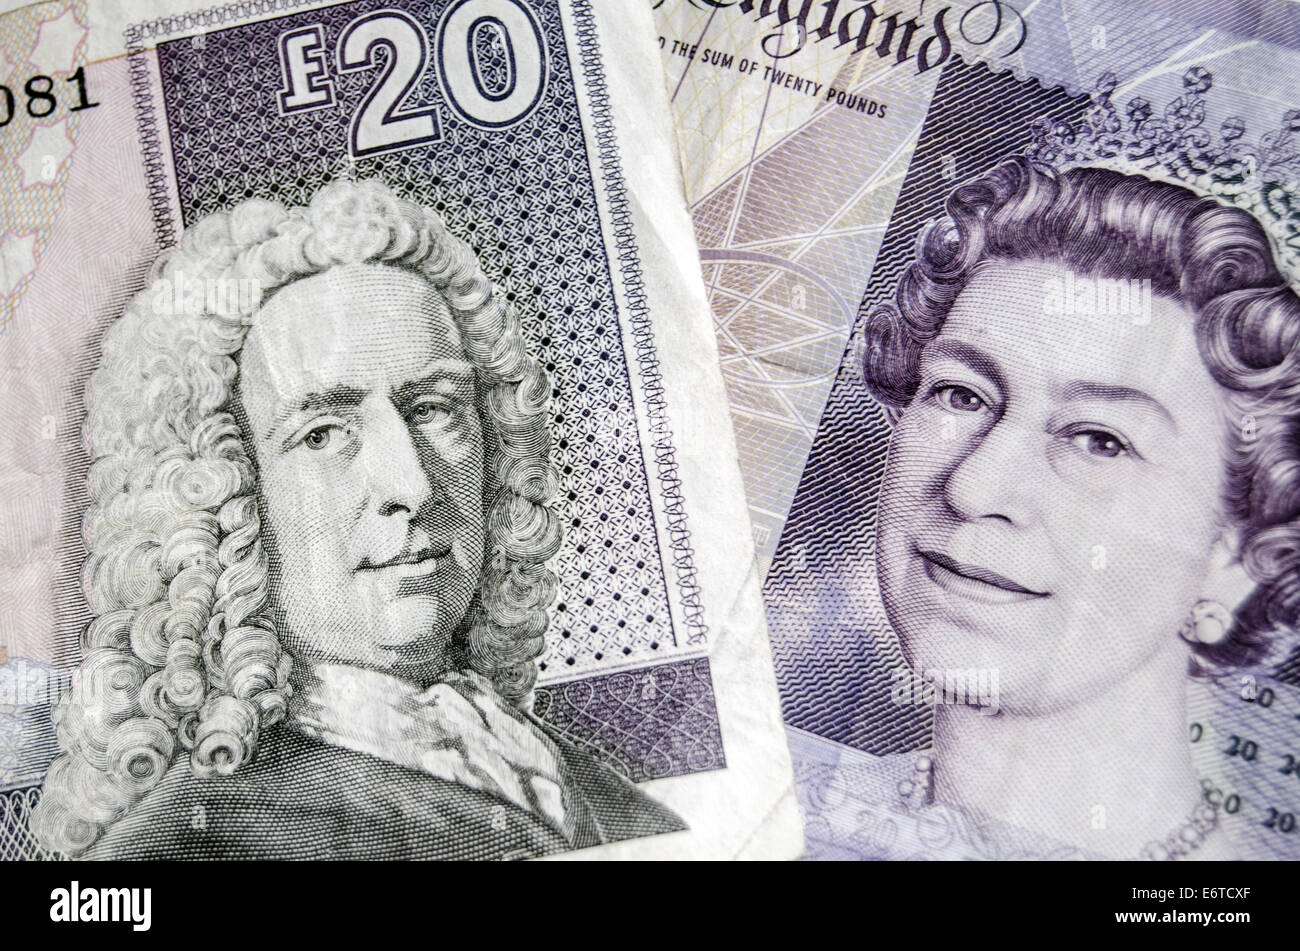 Details of twenty pound banknotes from the Royal Bank of Scotland and Bank of England Stock Photo